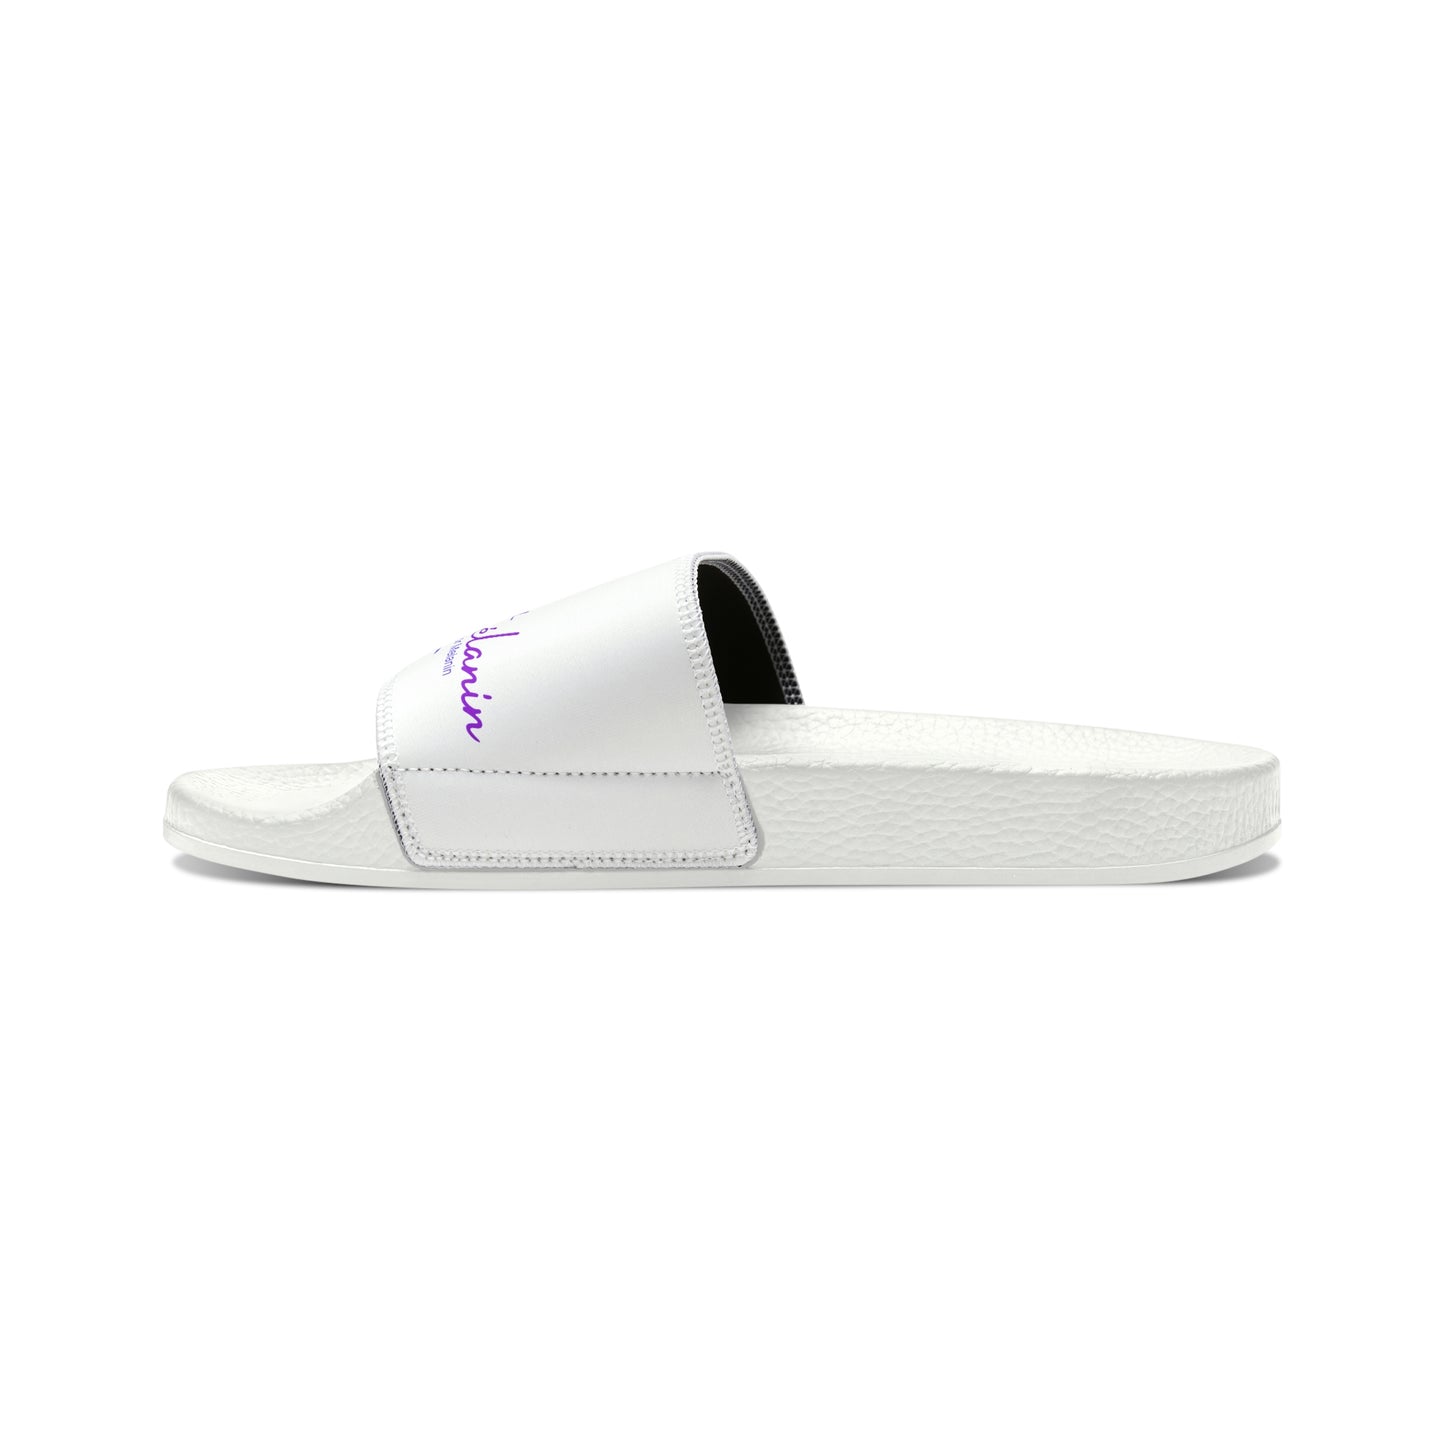 Youth Removable-Strap Sandals